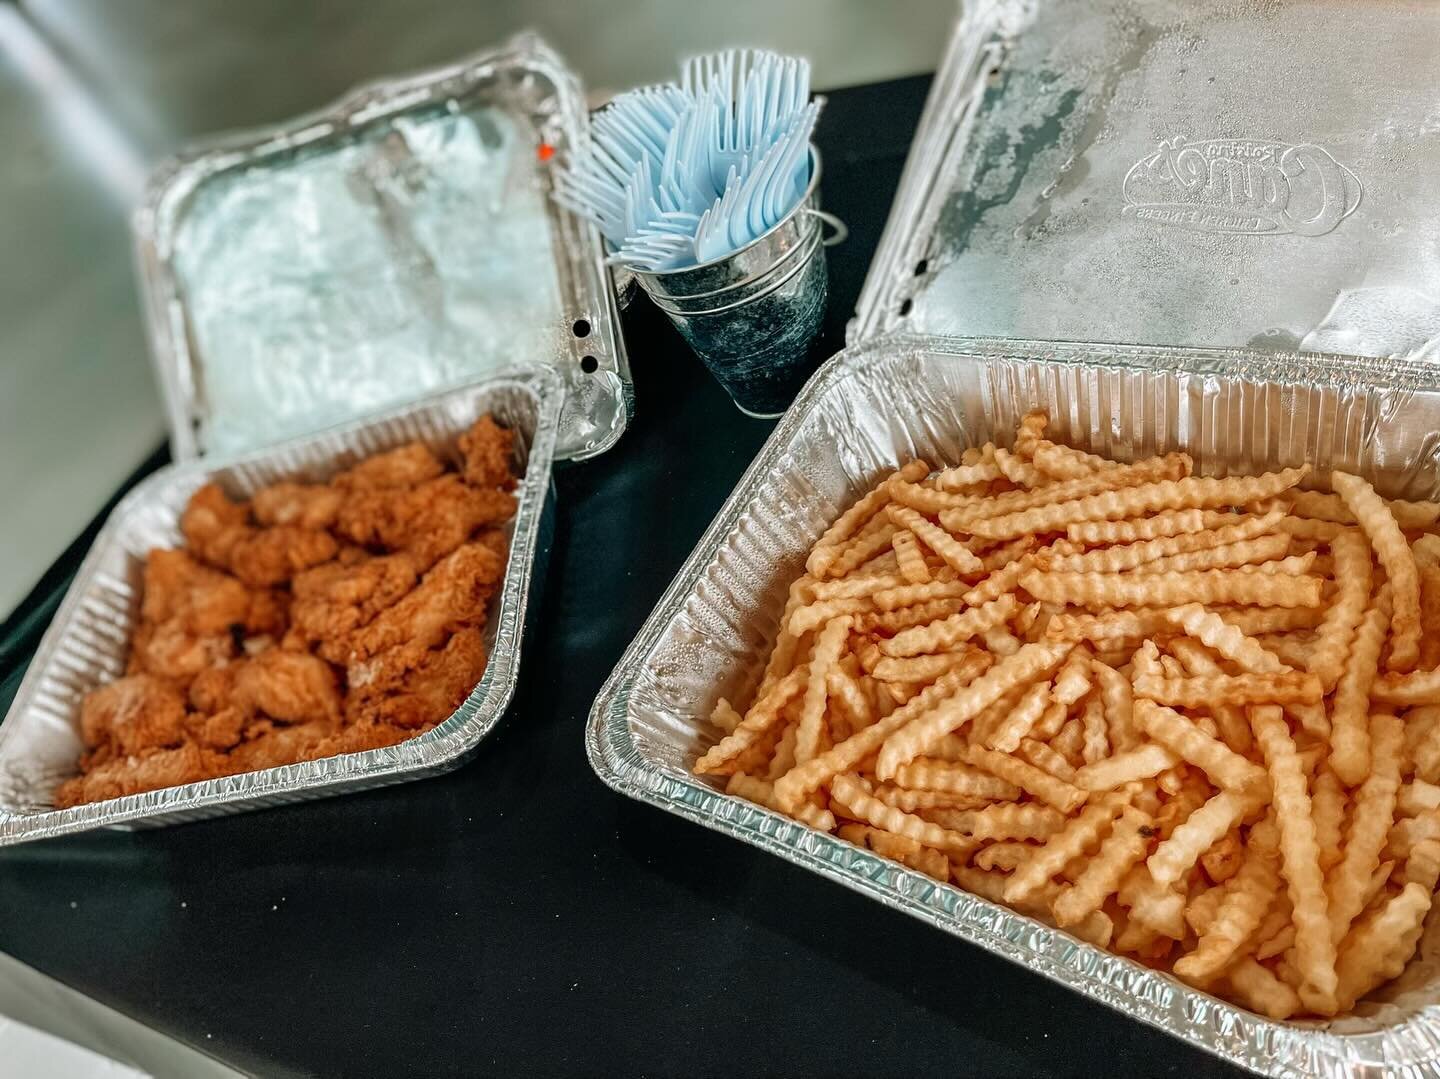 It&rsquo;s lunch on the geaux! Stop by the printer side of the clubhouse for some free canes before we run out!